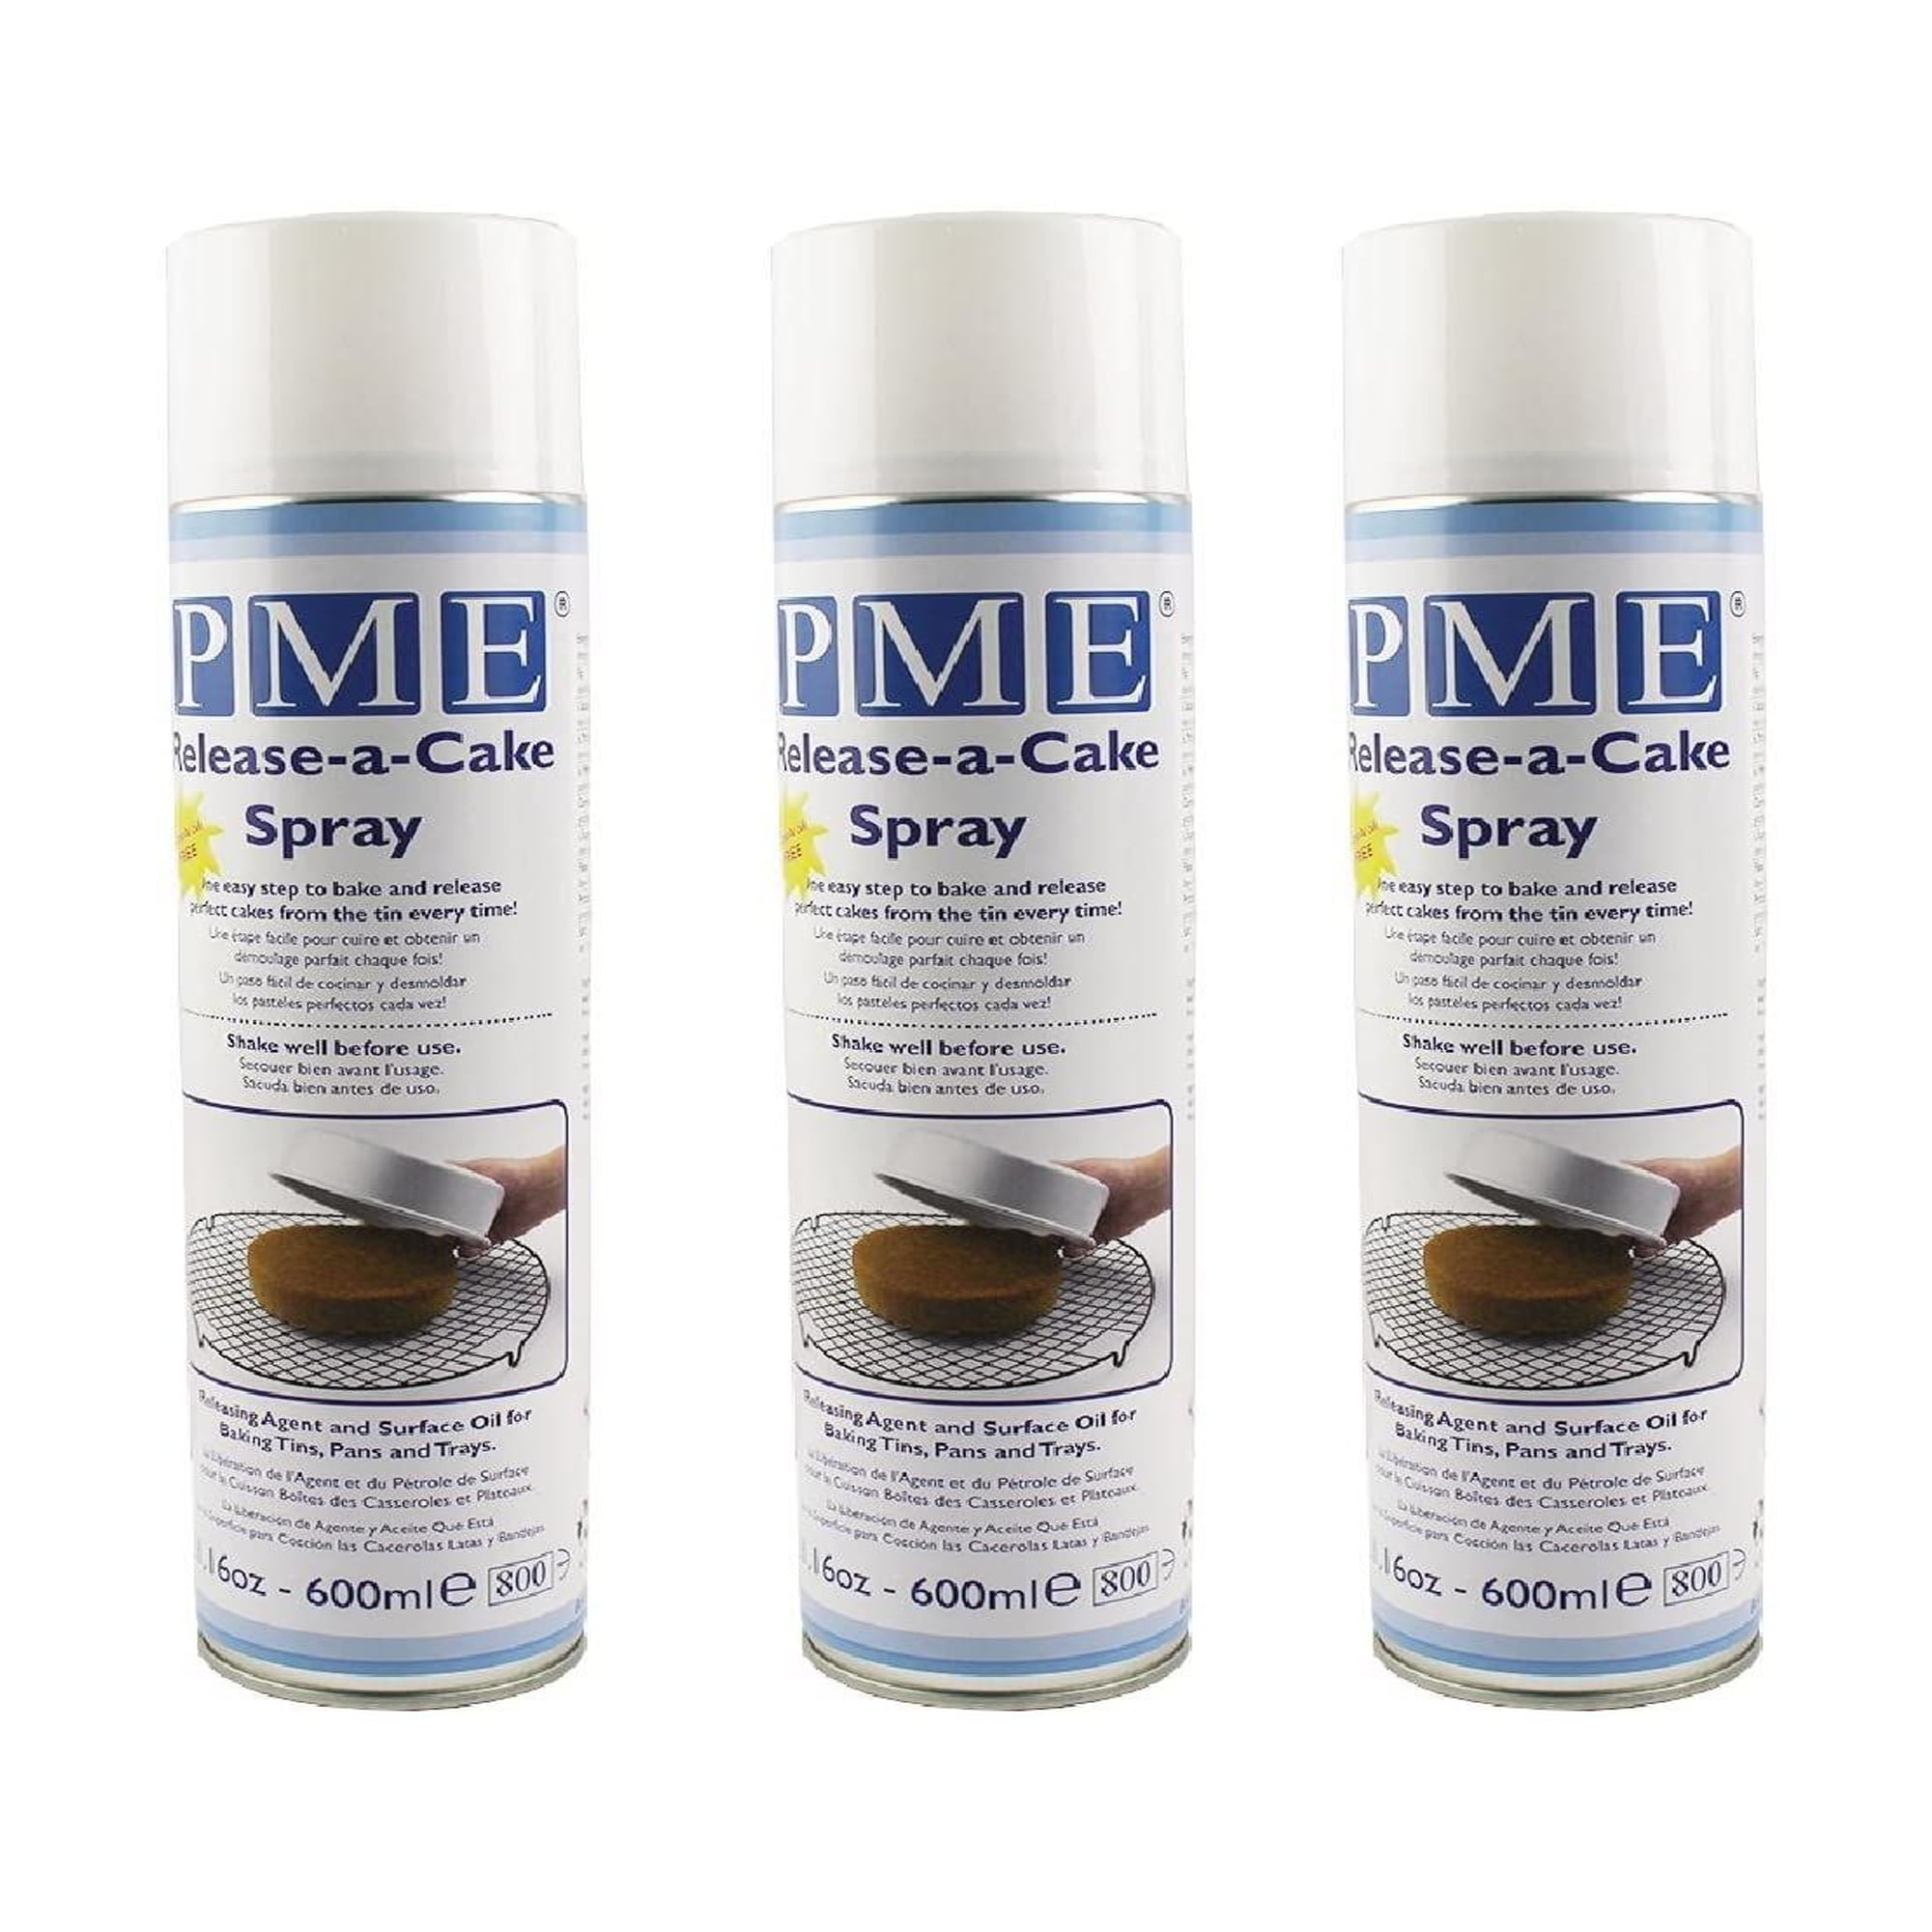 PME Release-a-Cake Spray 600ml - CN882 - Buy Online at Nisbets